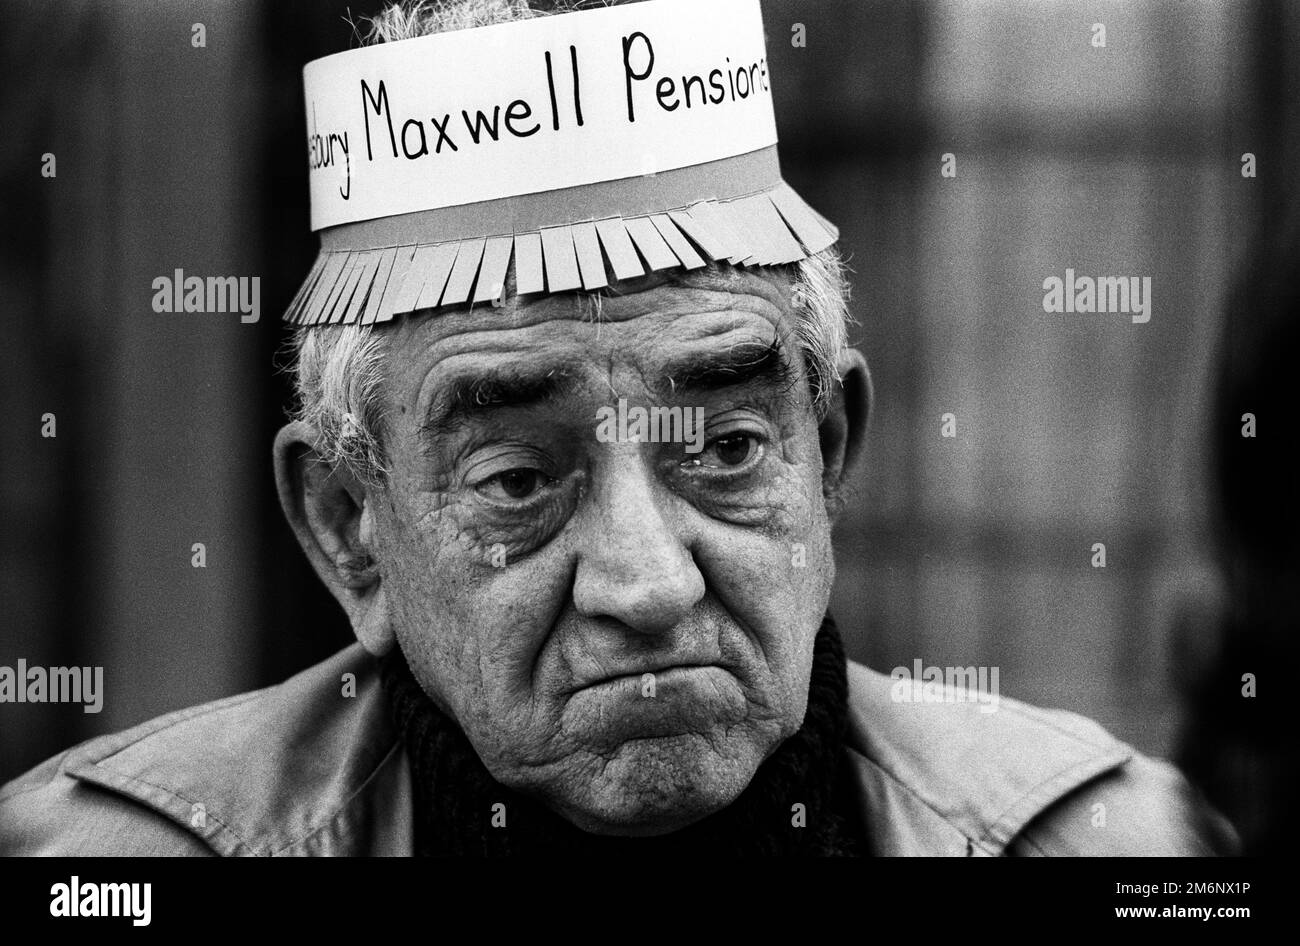 Robert Maxwell. A Maxwell pension protests in London for an investigation to replace his stolen pension funds by Robert Maxwell.November 1992 Stock Photo